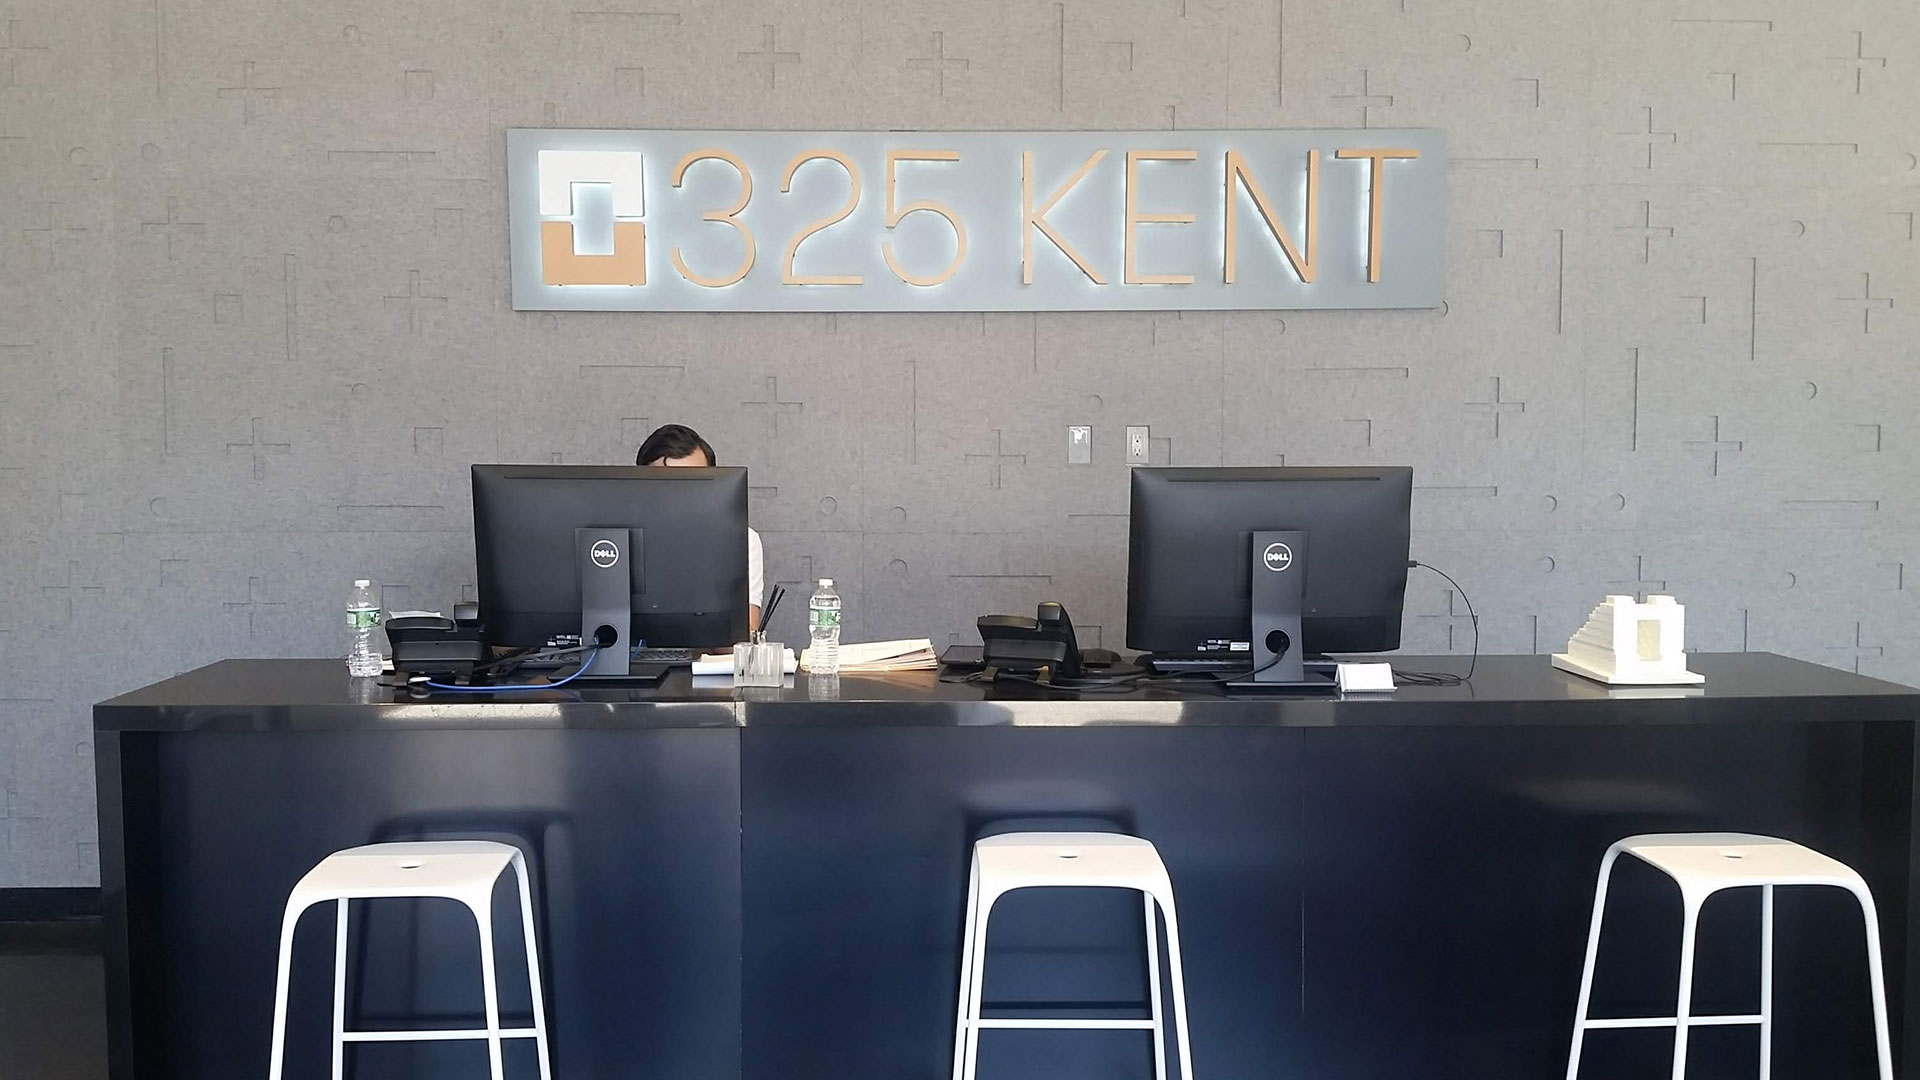 A desk with 3 stools and two computers. The wall behind it has a gray felt wall covering with plus and minus signs and a illuminated sign that says 325 Kent. This is a custom wall covering for a condo building in Brooklyn